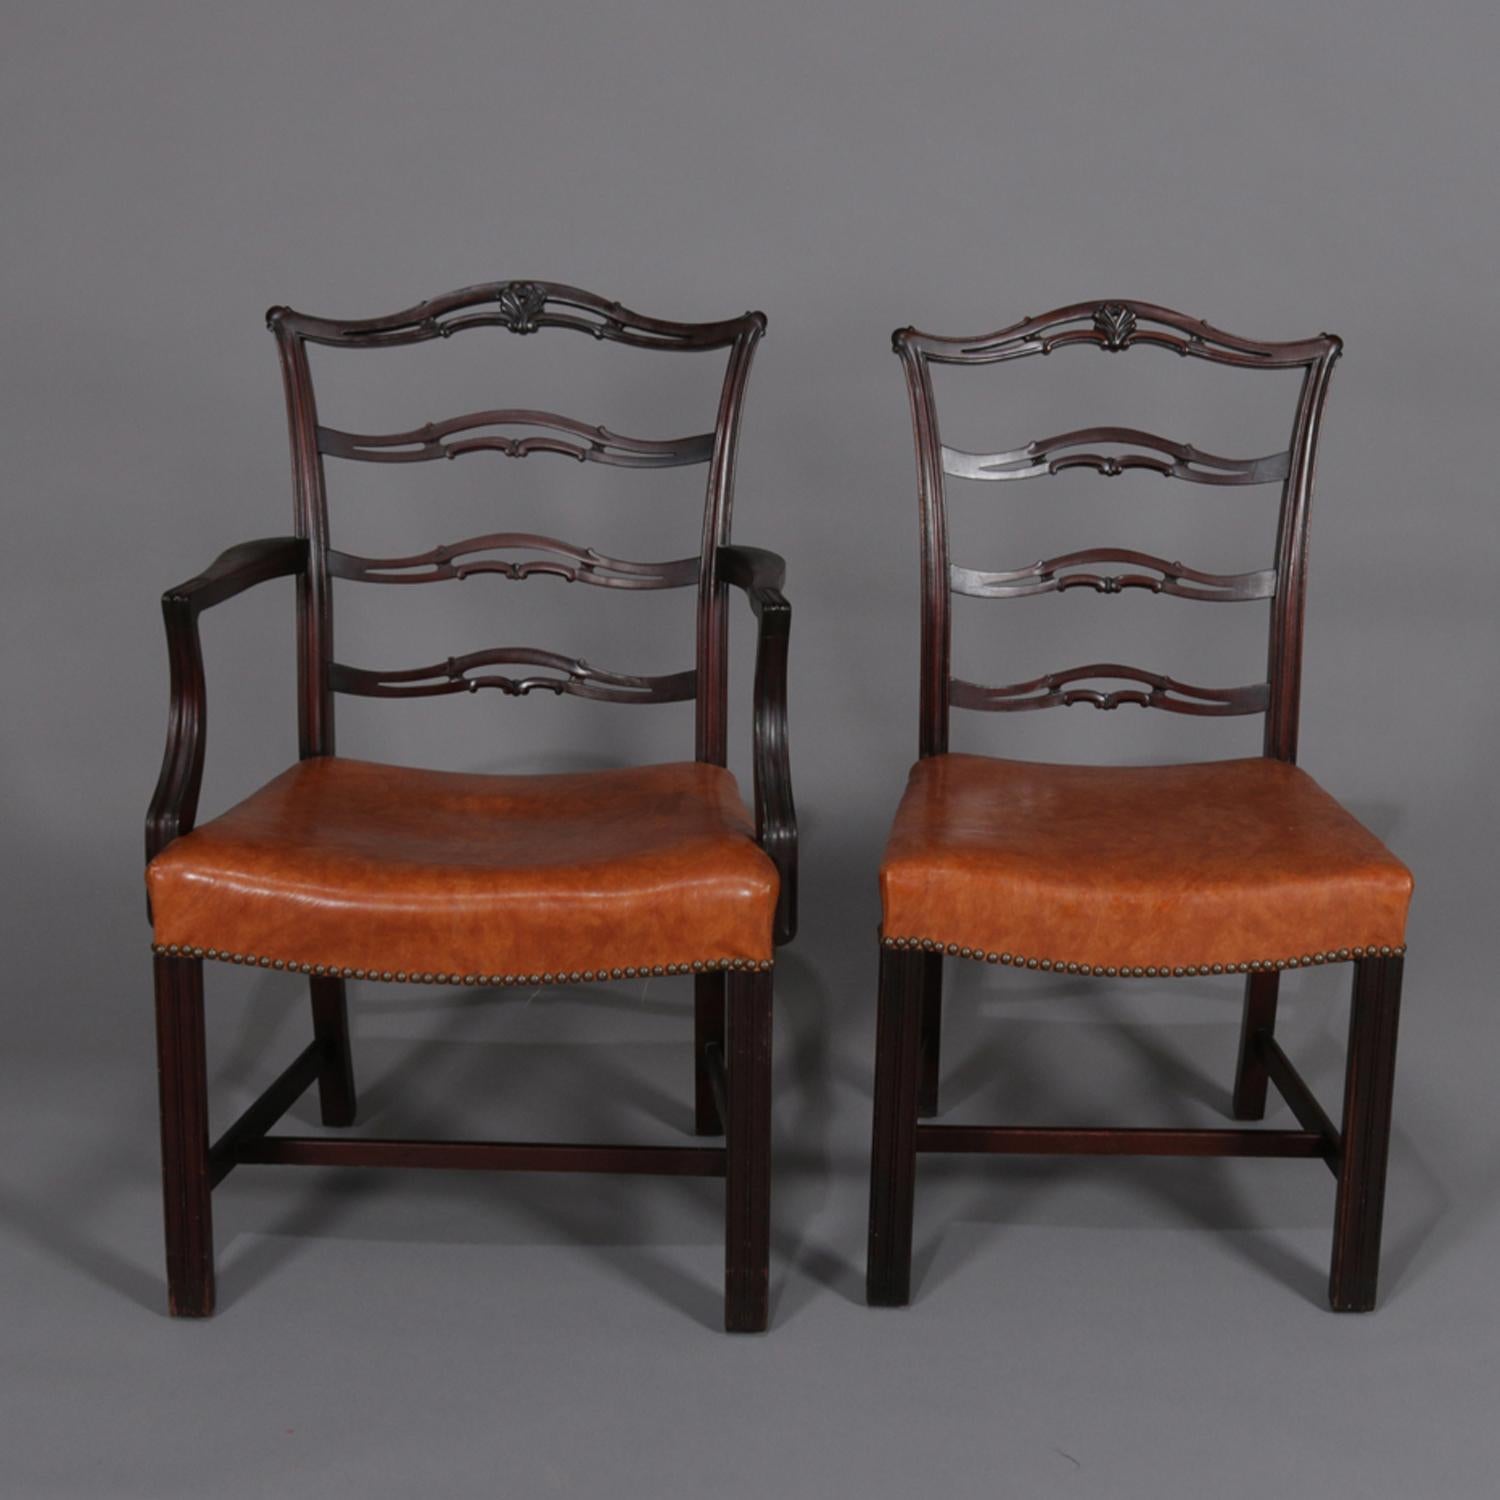 A set of 12 antique Chippendale style ribbon back dining chairs feature mahogany frames with laddered ribbon backs and upholstered seats, includes 2 arm and 10 side chairs, circa 1920.

Measures: Armless 36.5